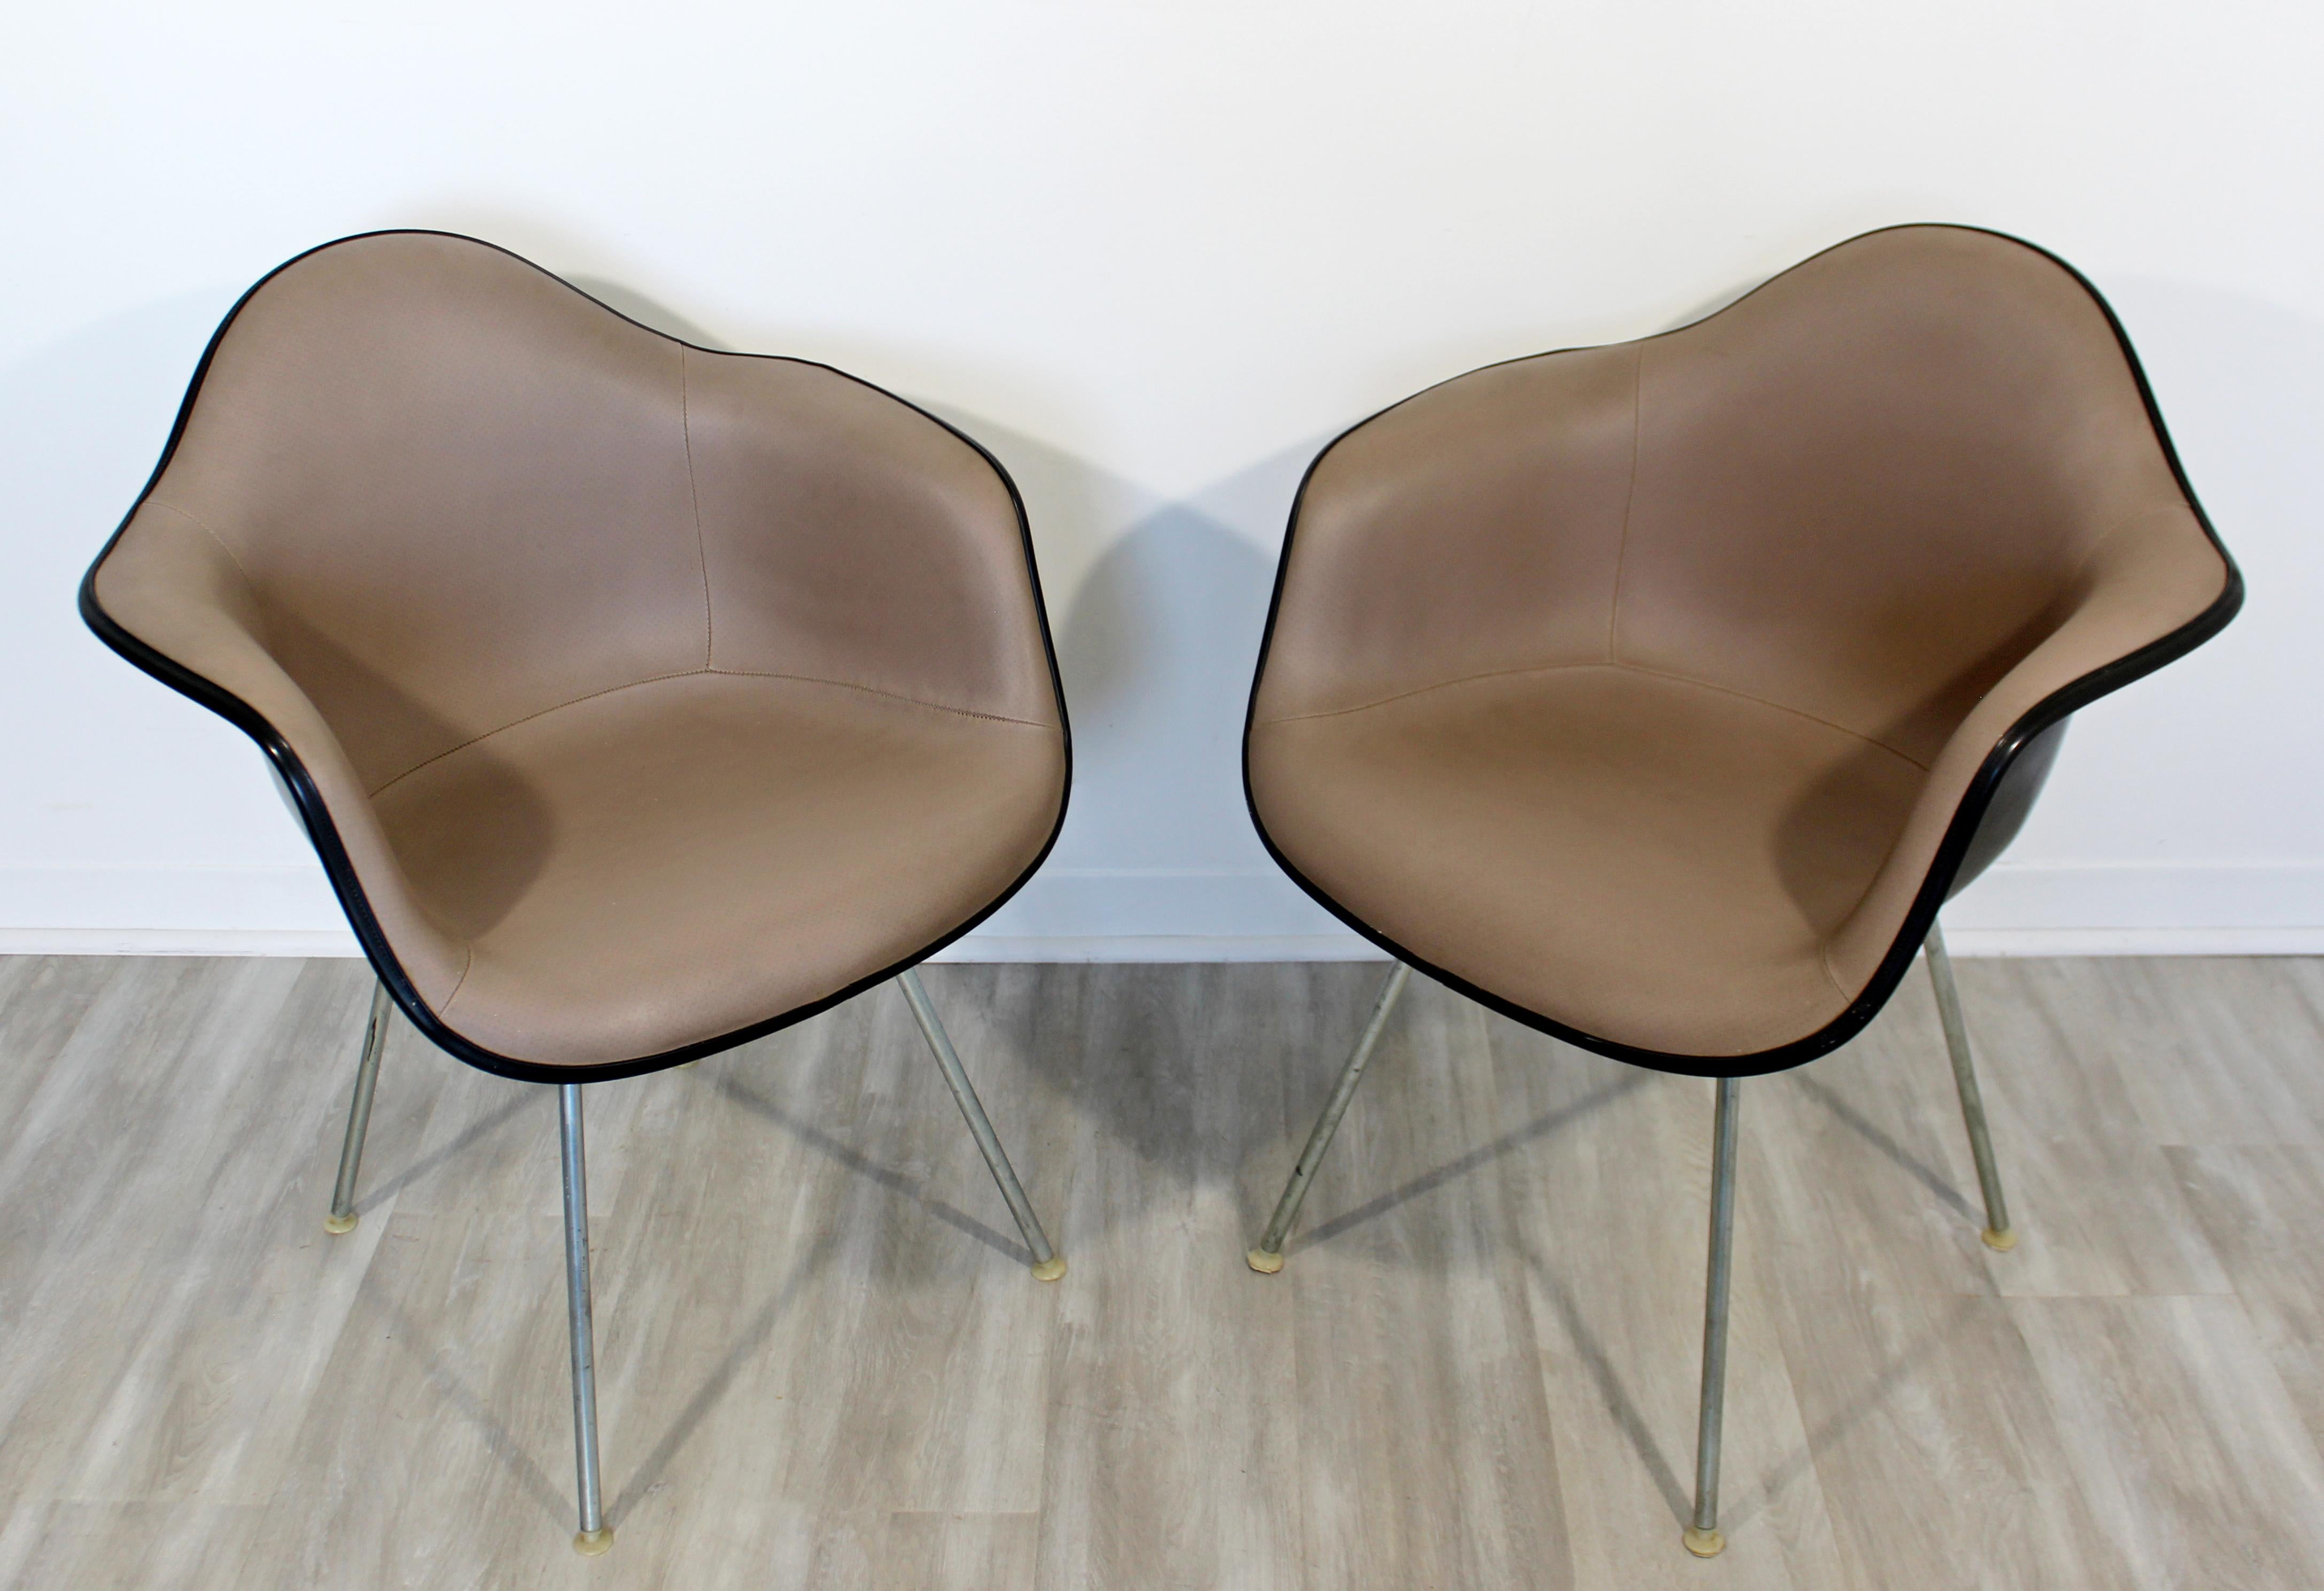 For your consideration is a wonderful pair of shell armchairs, with fabric seats, by Charles Eames for Herman Miller, circa 1960s. In excellent vintage condition. The dimensions are 25